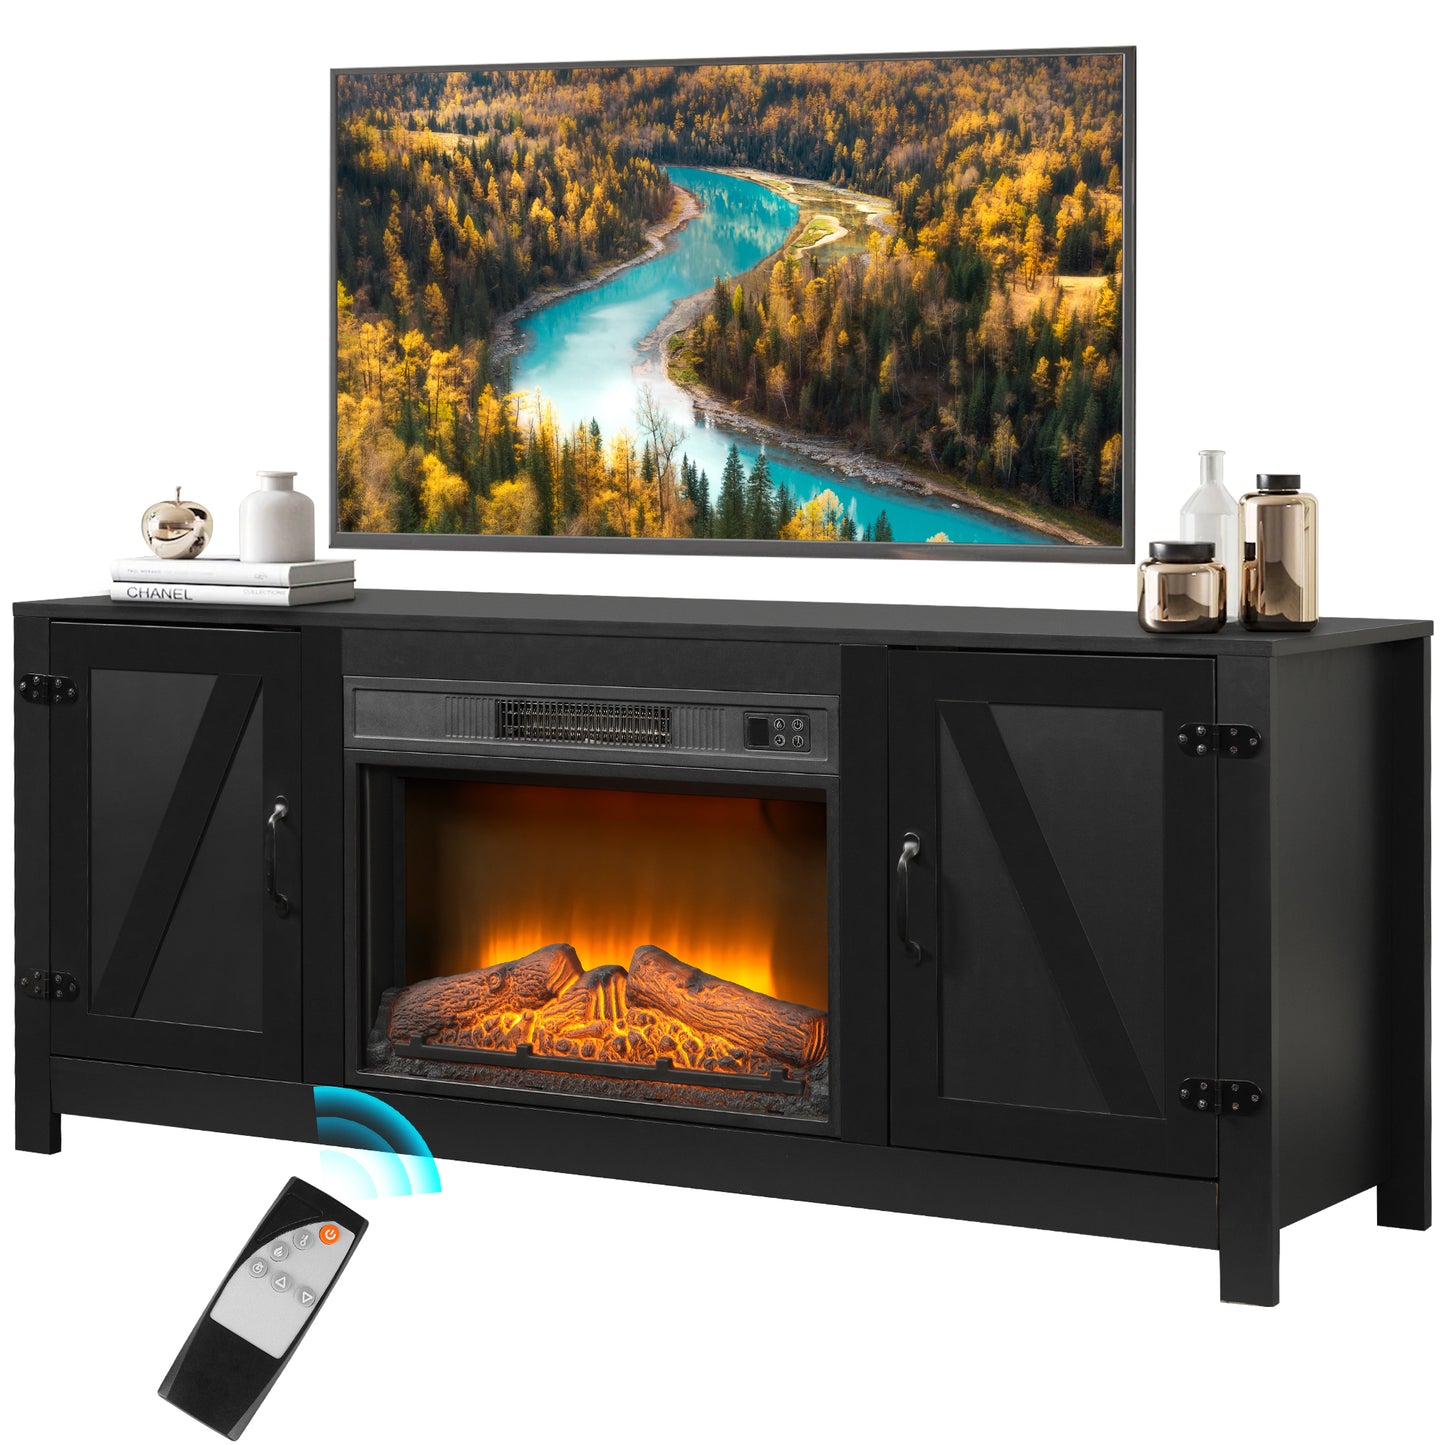 Fireplace TV Stand for TVs up to 65 inches, 58 Inch, Black